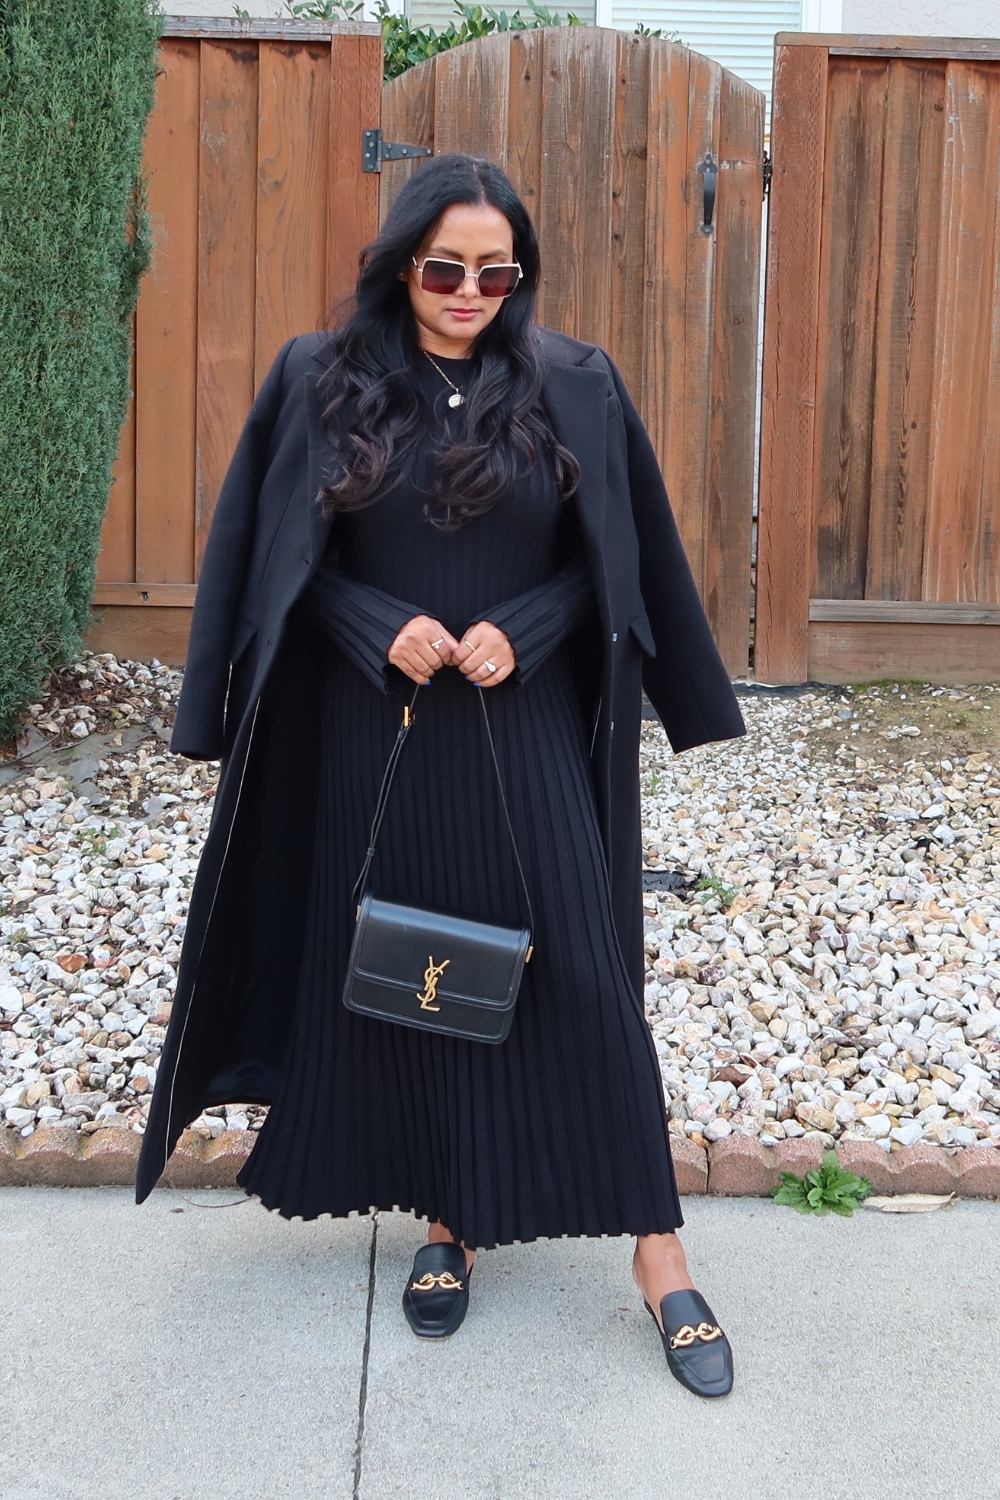 Black Long Dress with Black Coat outfit